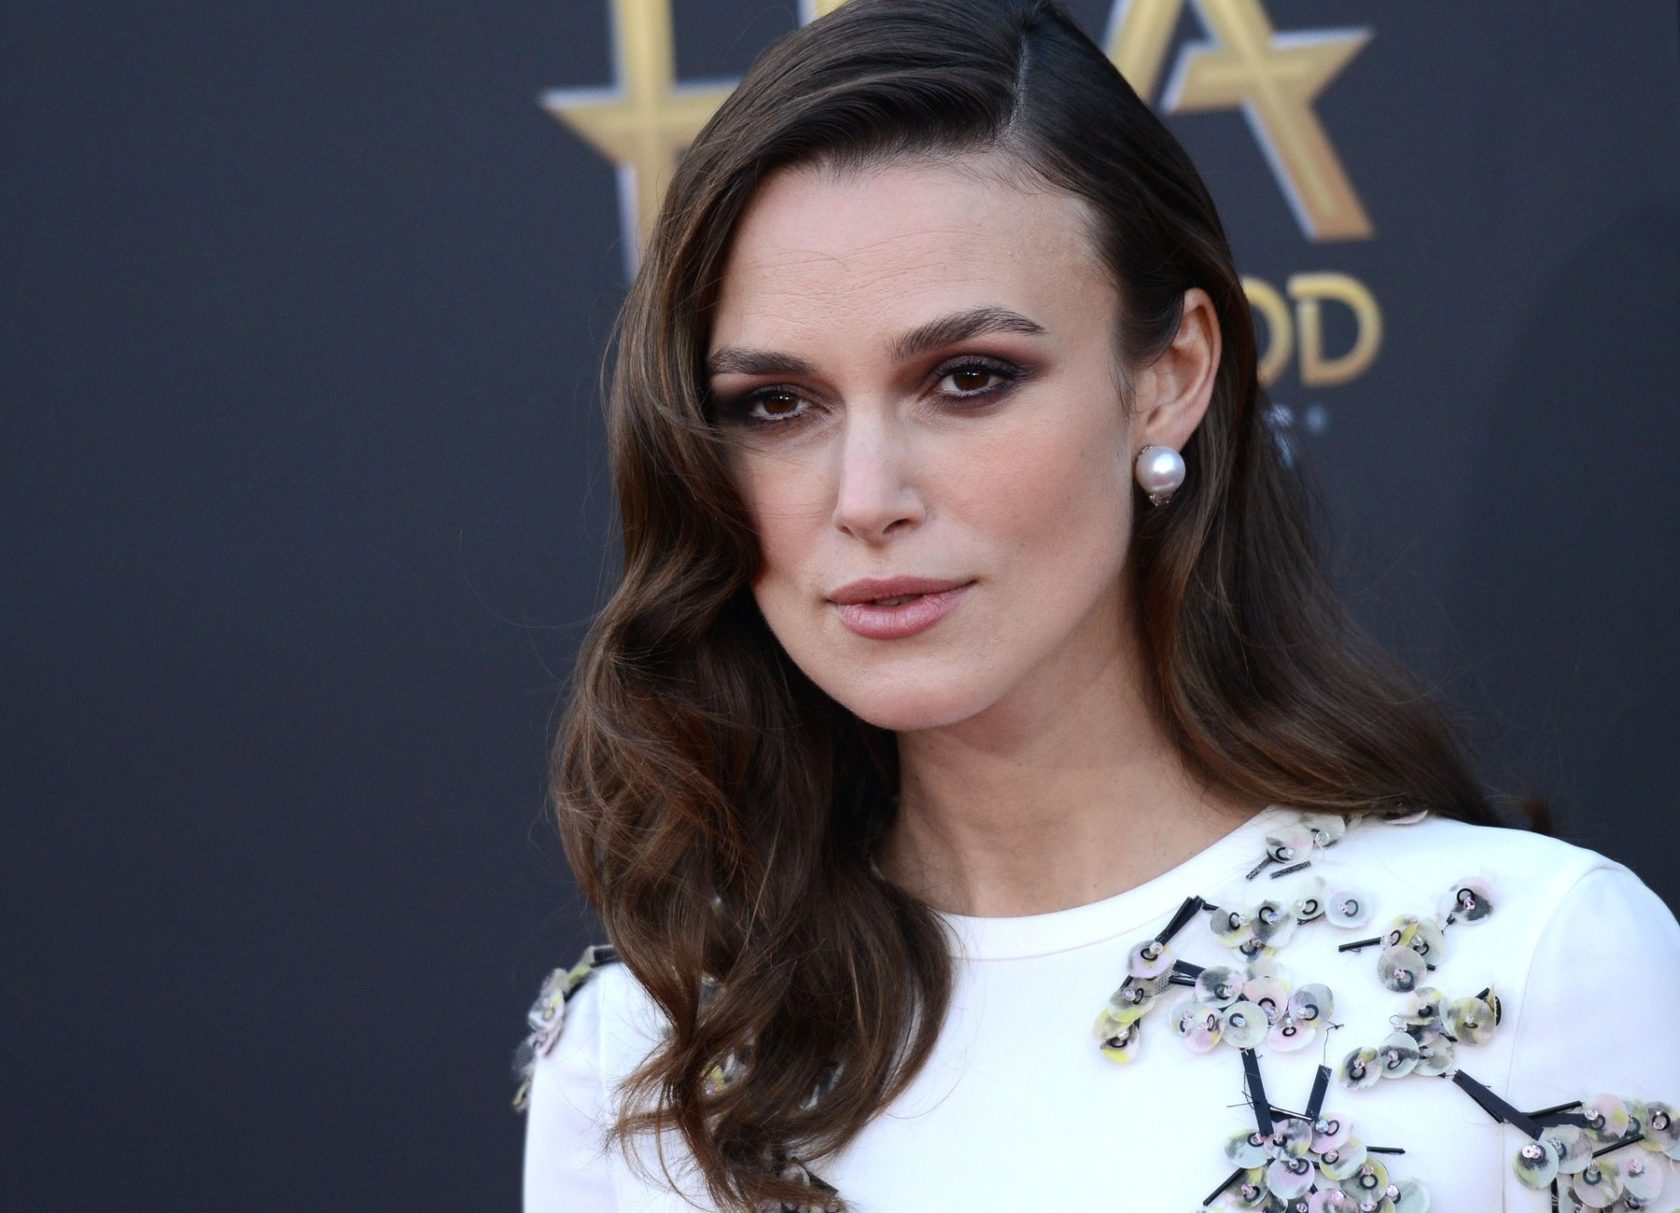 KEIRA KNIGHTLEY @ the 2014 Hollywood Film Awards held @ the Palladium. November 14, 2014, Image: 210900547, License: Rights-managed, Restrictions: AMERICA, Model Release: no, Credit line: Profimedia, Visual